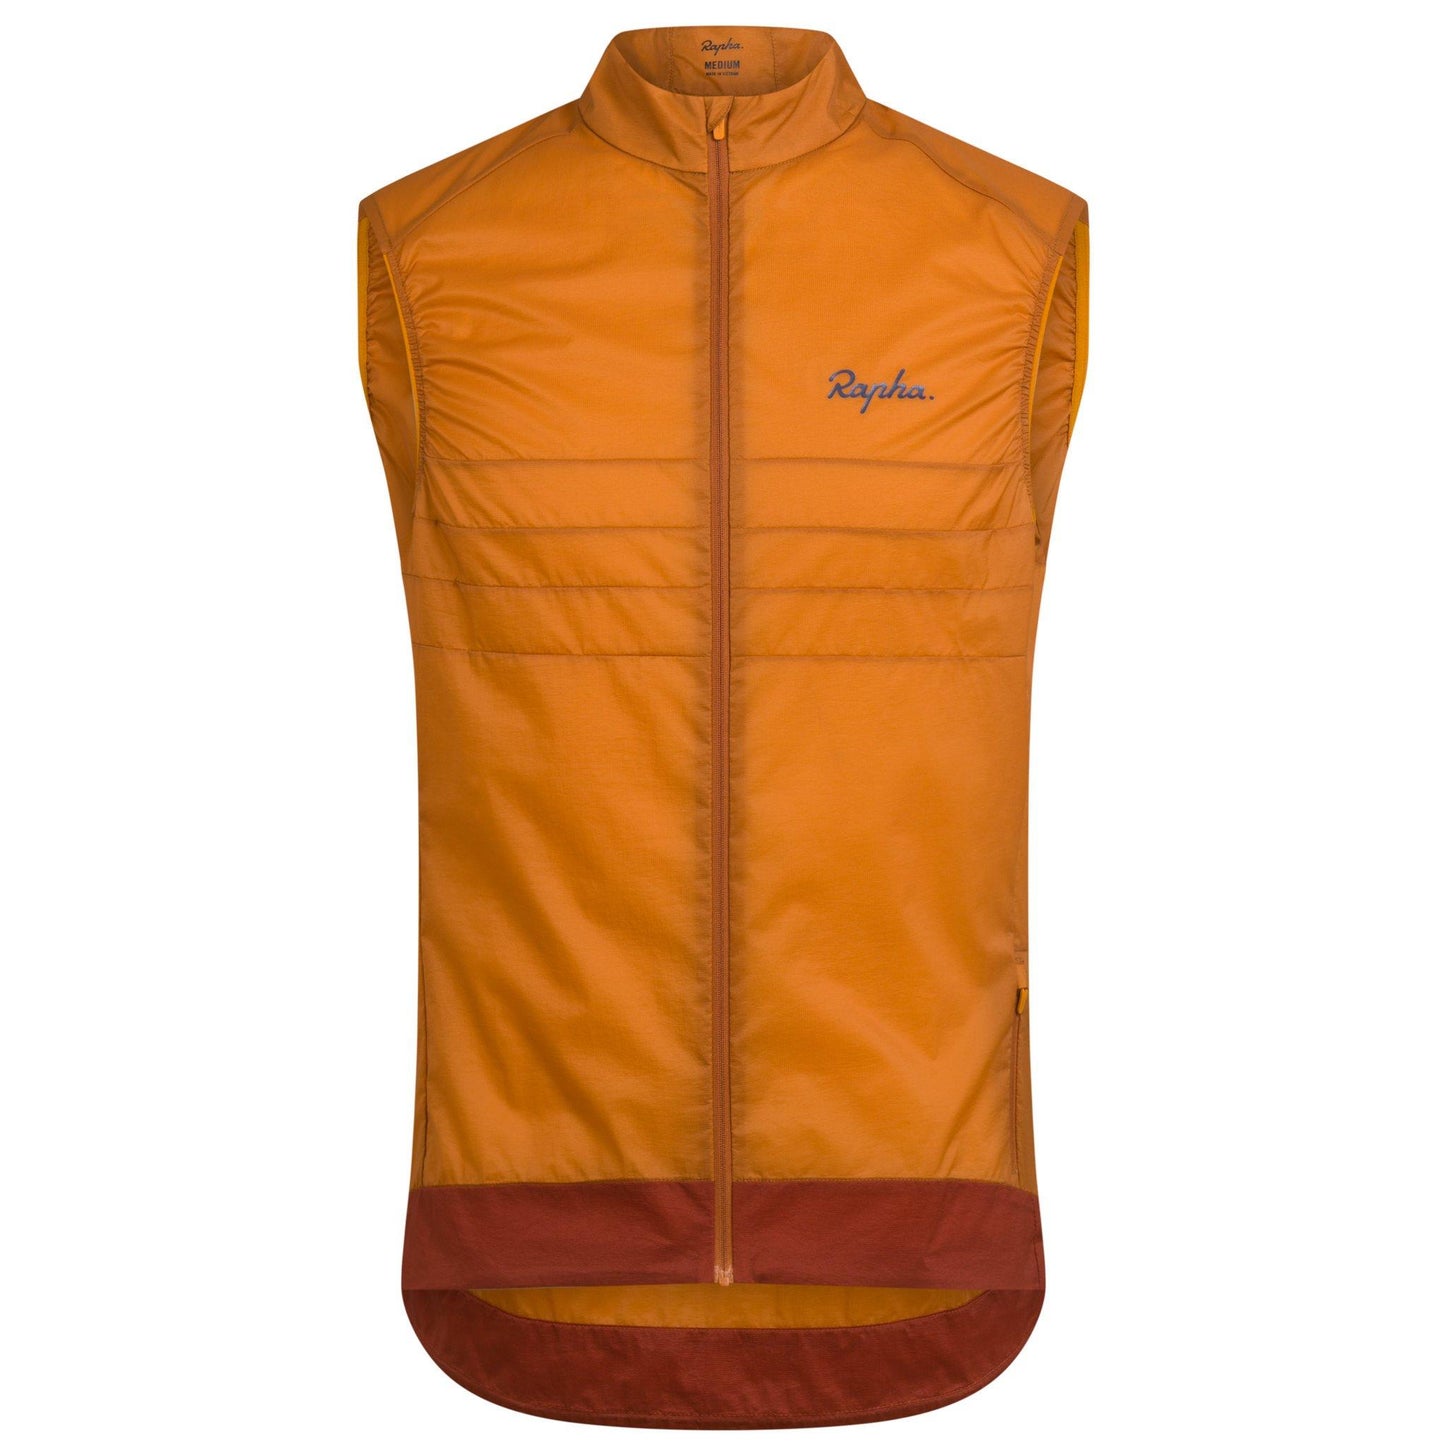 Rapha Mens Explore Lightweight Gilet - Mustard buy online at Woolys Wheels Sydney with free delivery